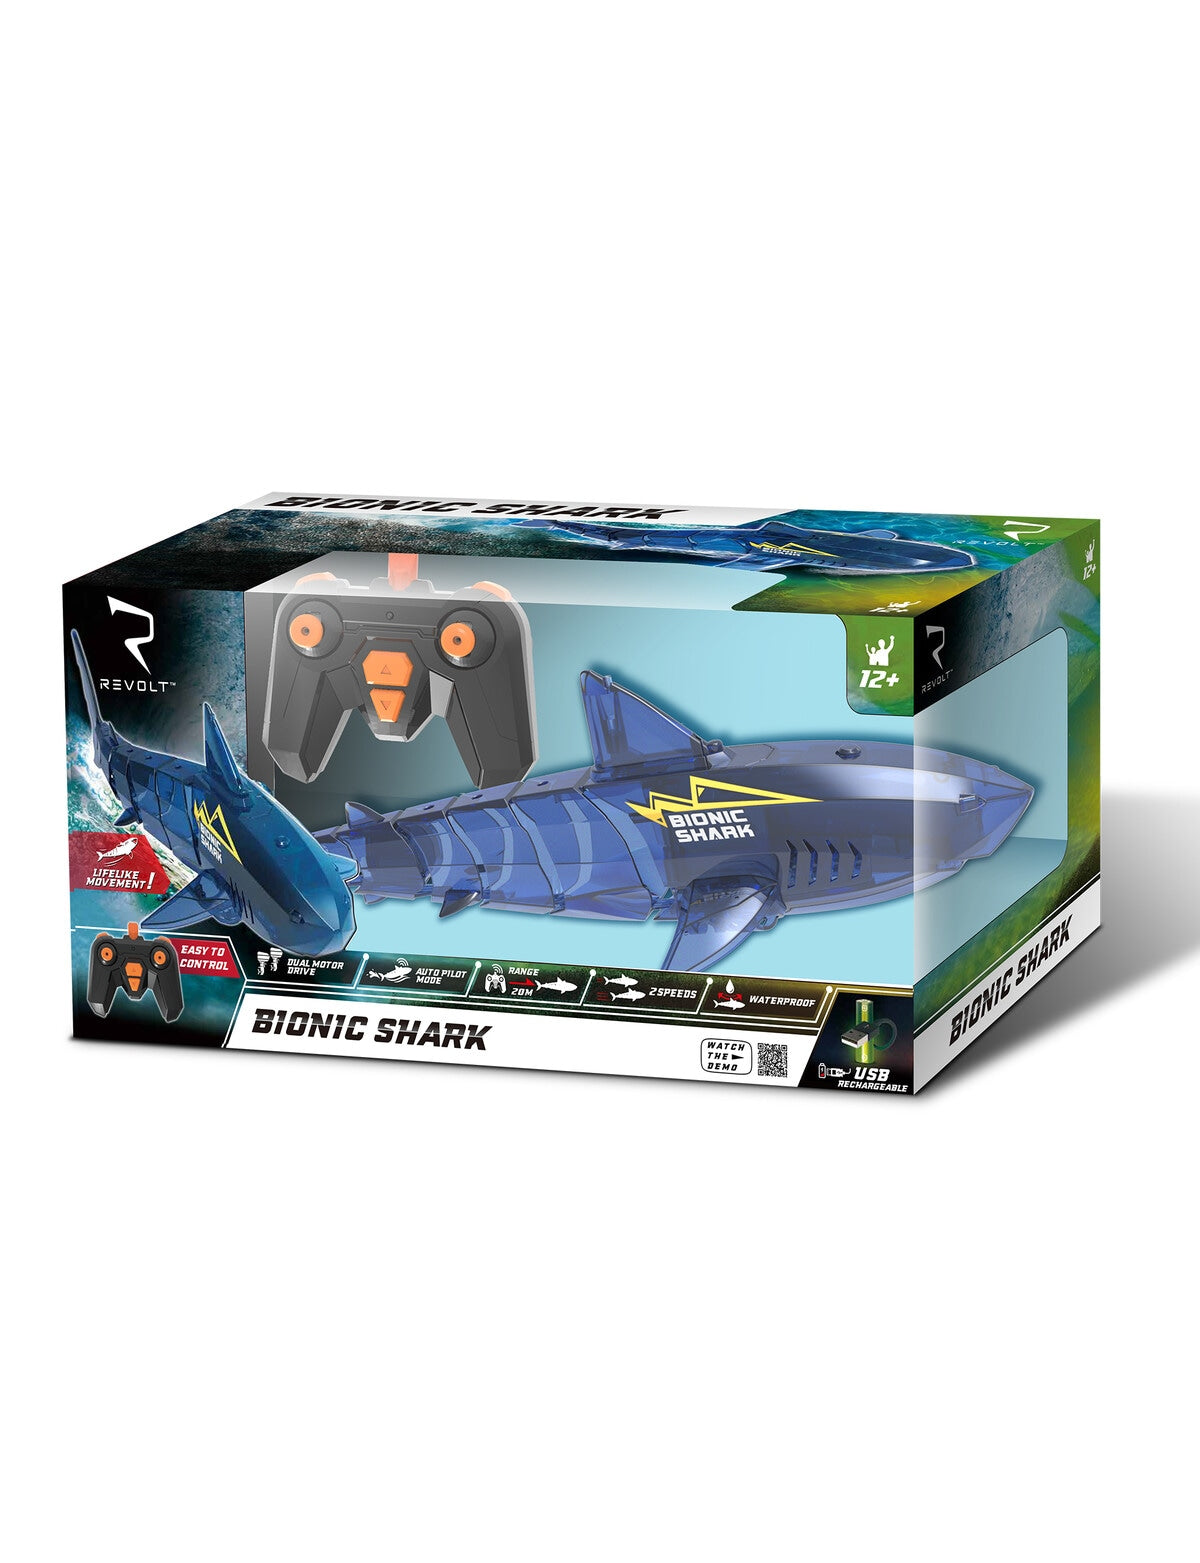 Revolt R/c Bionic Shark - must be in water to activate.